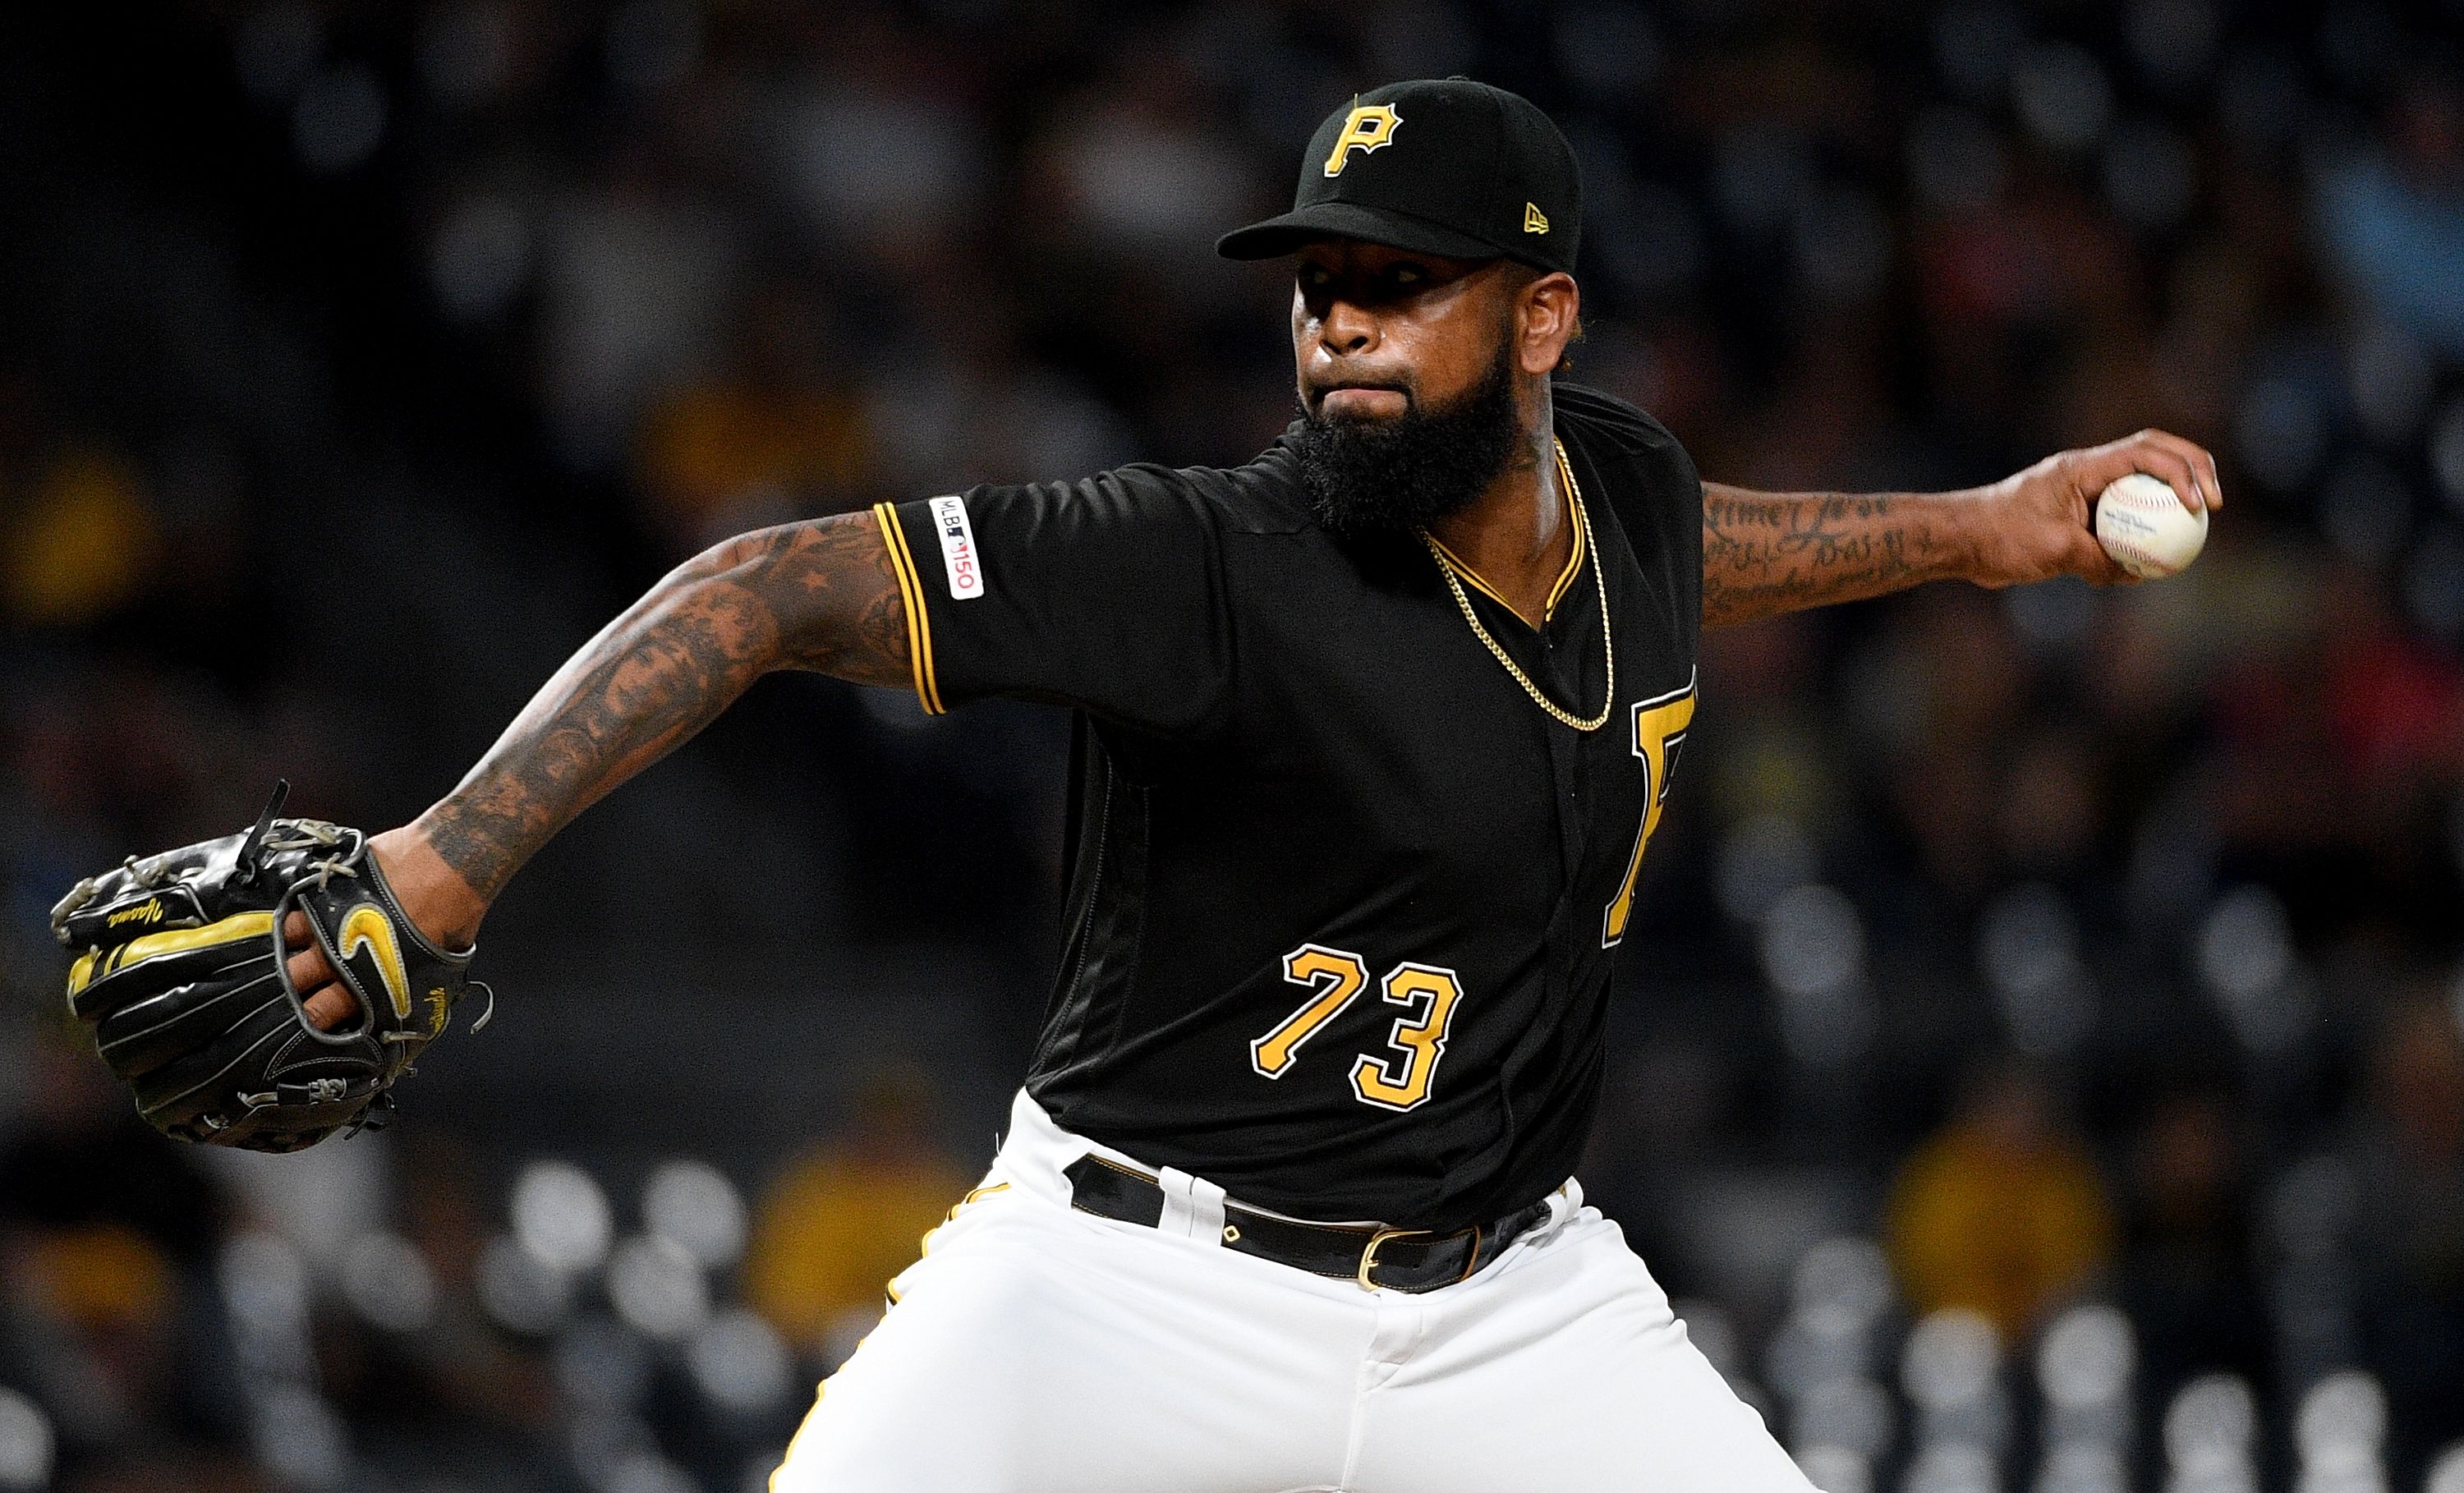 Pittsburgh Pirates: Felipe Vazquez convicted on 15 sexual assault charges